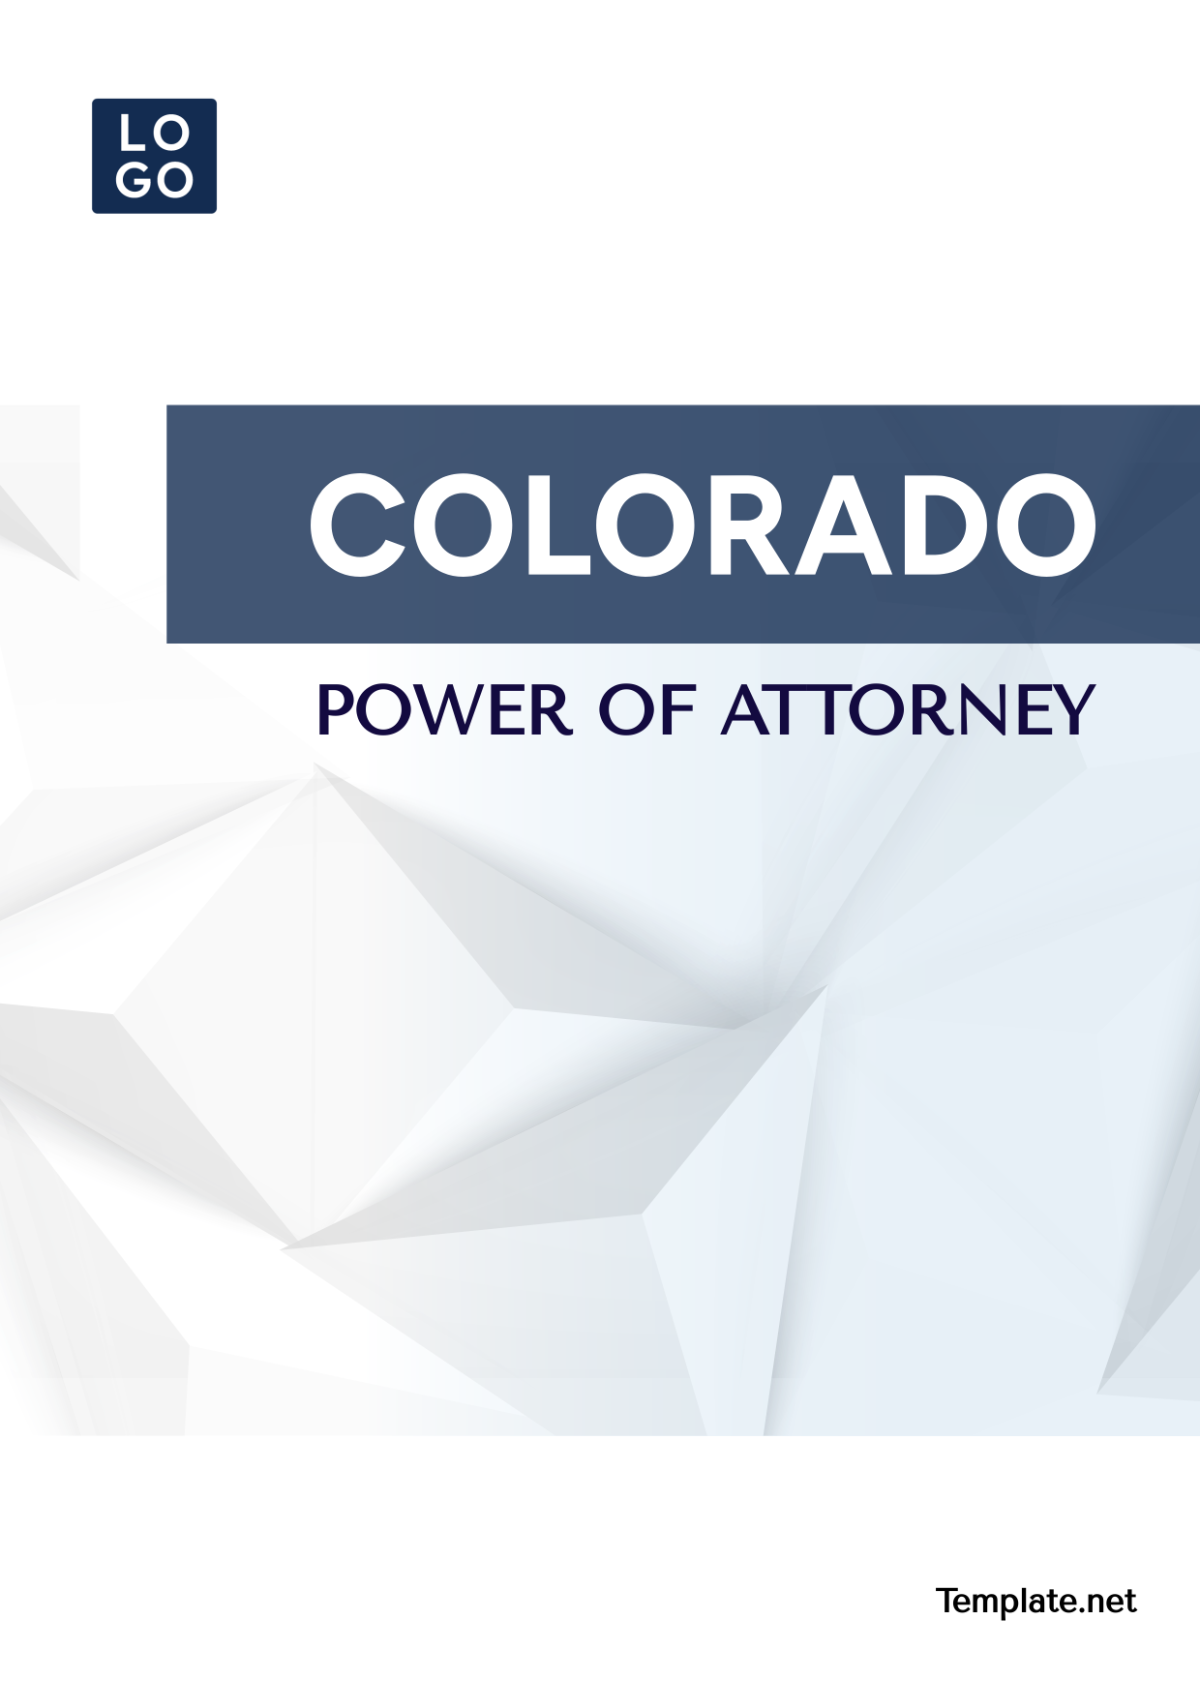 Colorado Power of Attorney Cover Page Template